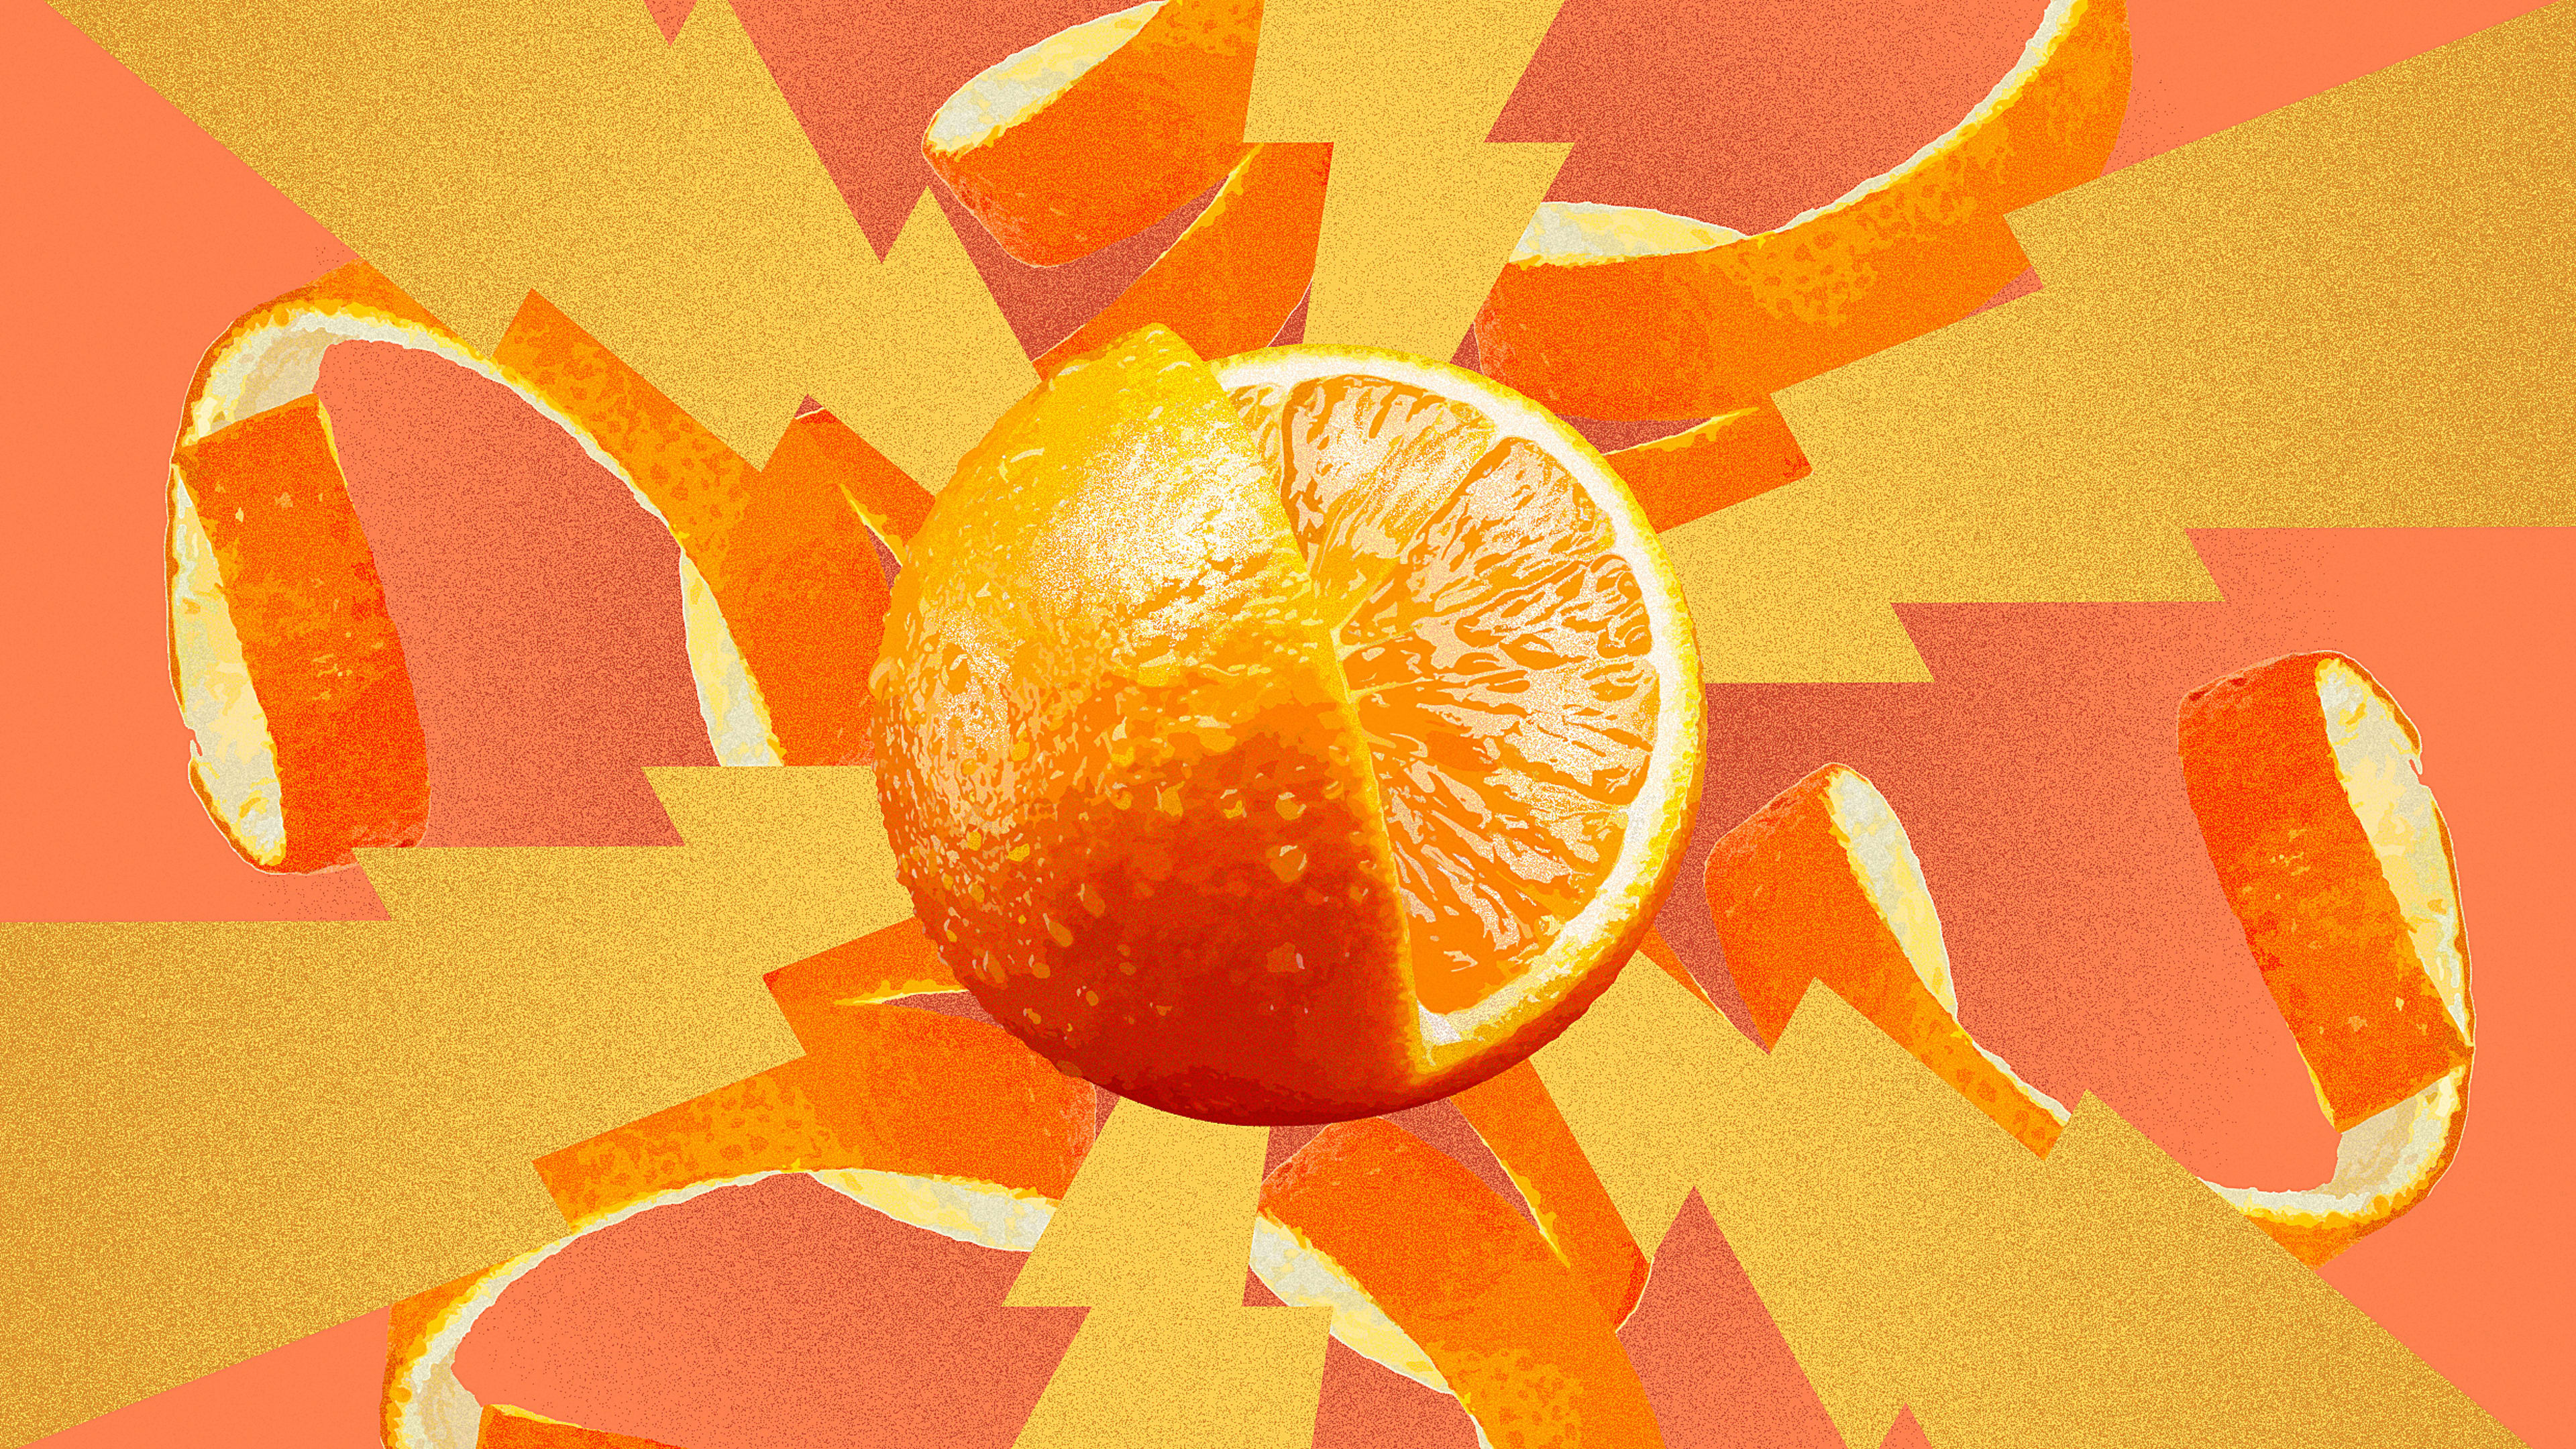 Seville is turning its iconic oranges into electricity